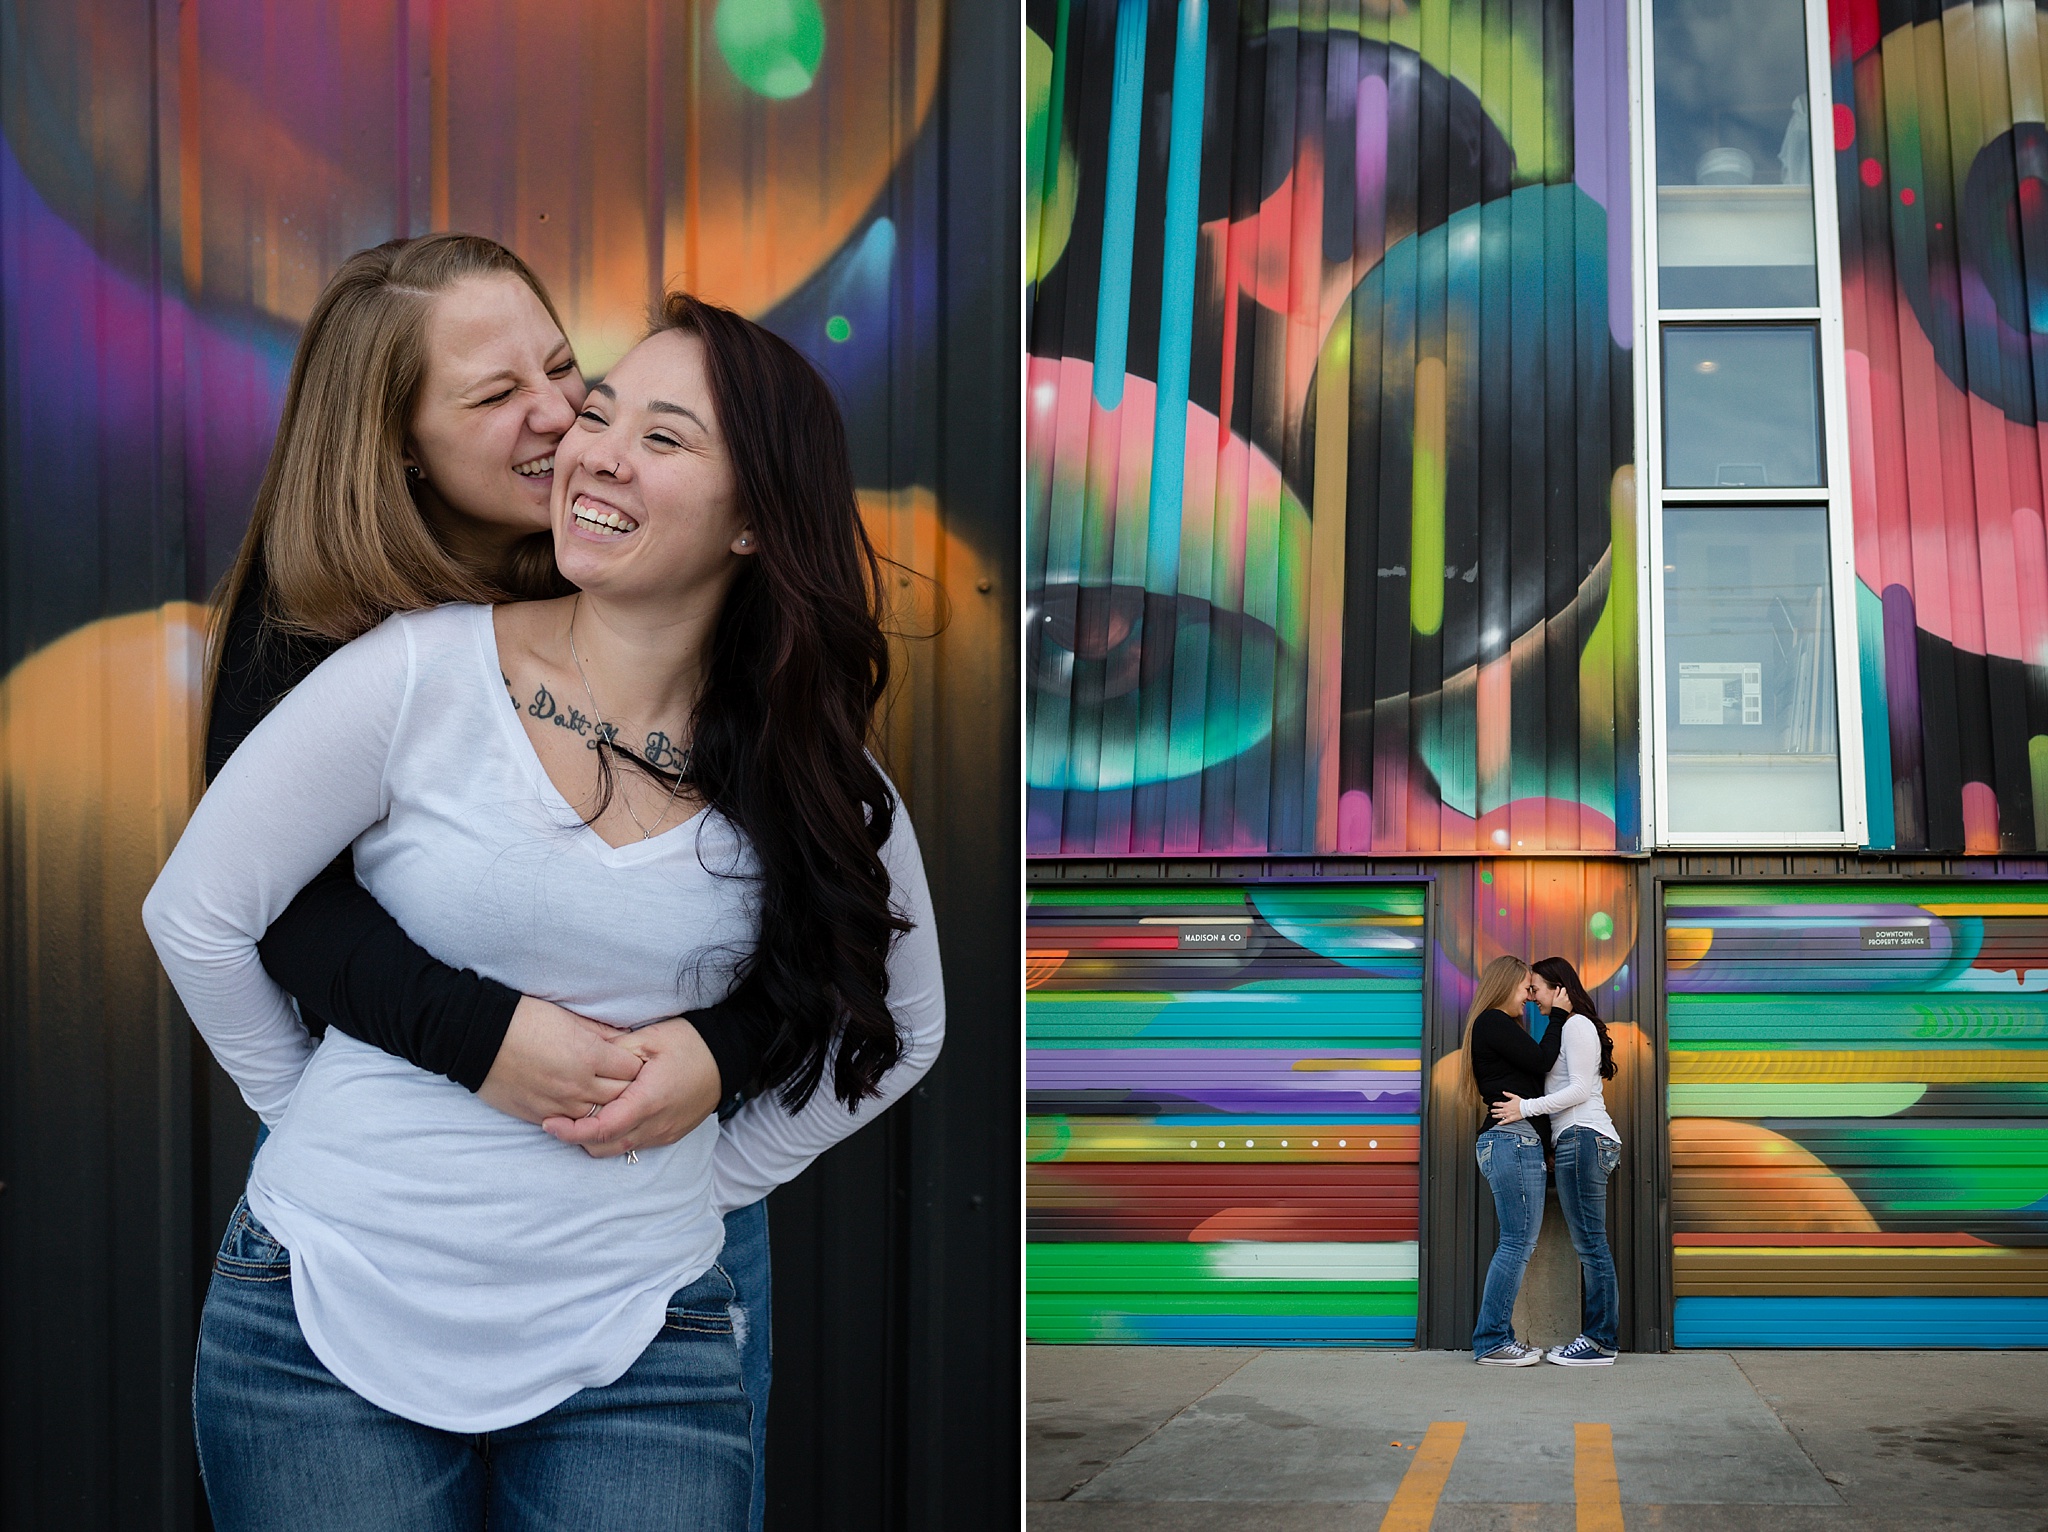 Couple standing in front of a colorful mural. Jessica & Caity’s Same-Sex Engagement Session at 10 Barrel Brewery & RiNo District by Colorado Engagement Photographer, Jennifer Garza. 10 Barrel Brewery Engagement, Brewery Engagement Photos, RiNo District Engagement Photos, RiNo District, RiNo Engagement Photography, Denver Engagement Photography, Denver Engagement, Colorado Engagement Photography, Urban Engagement Photos, Same-Sex Engagement Photography, Same-Sex Engagement Photos, Same-Sex Marriage, Love is Love, LGBTQ